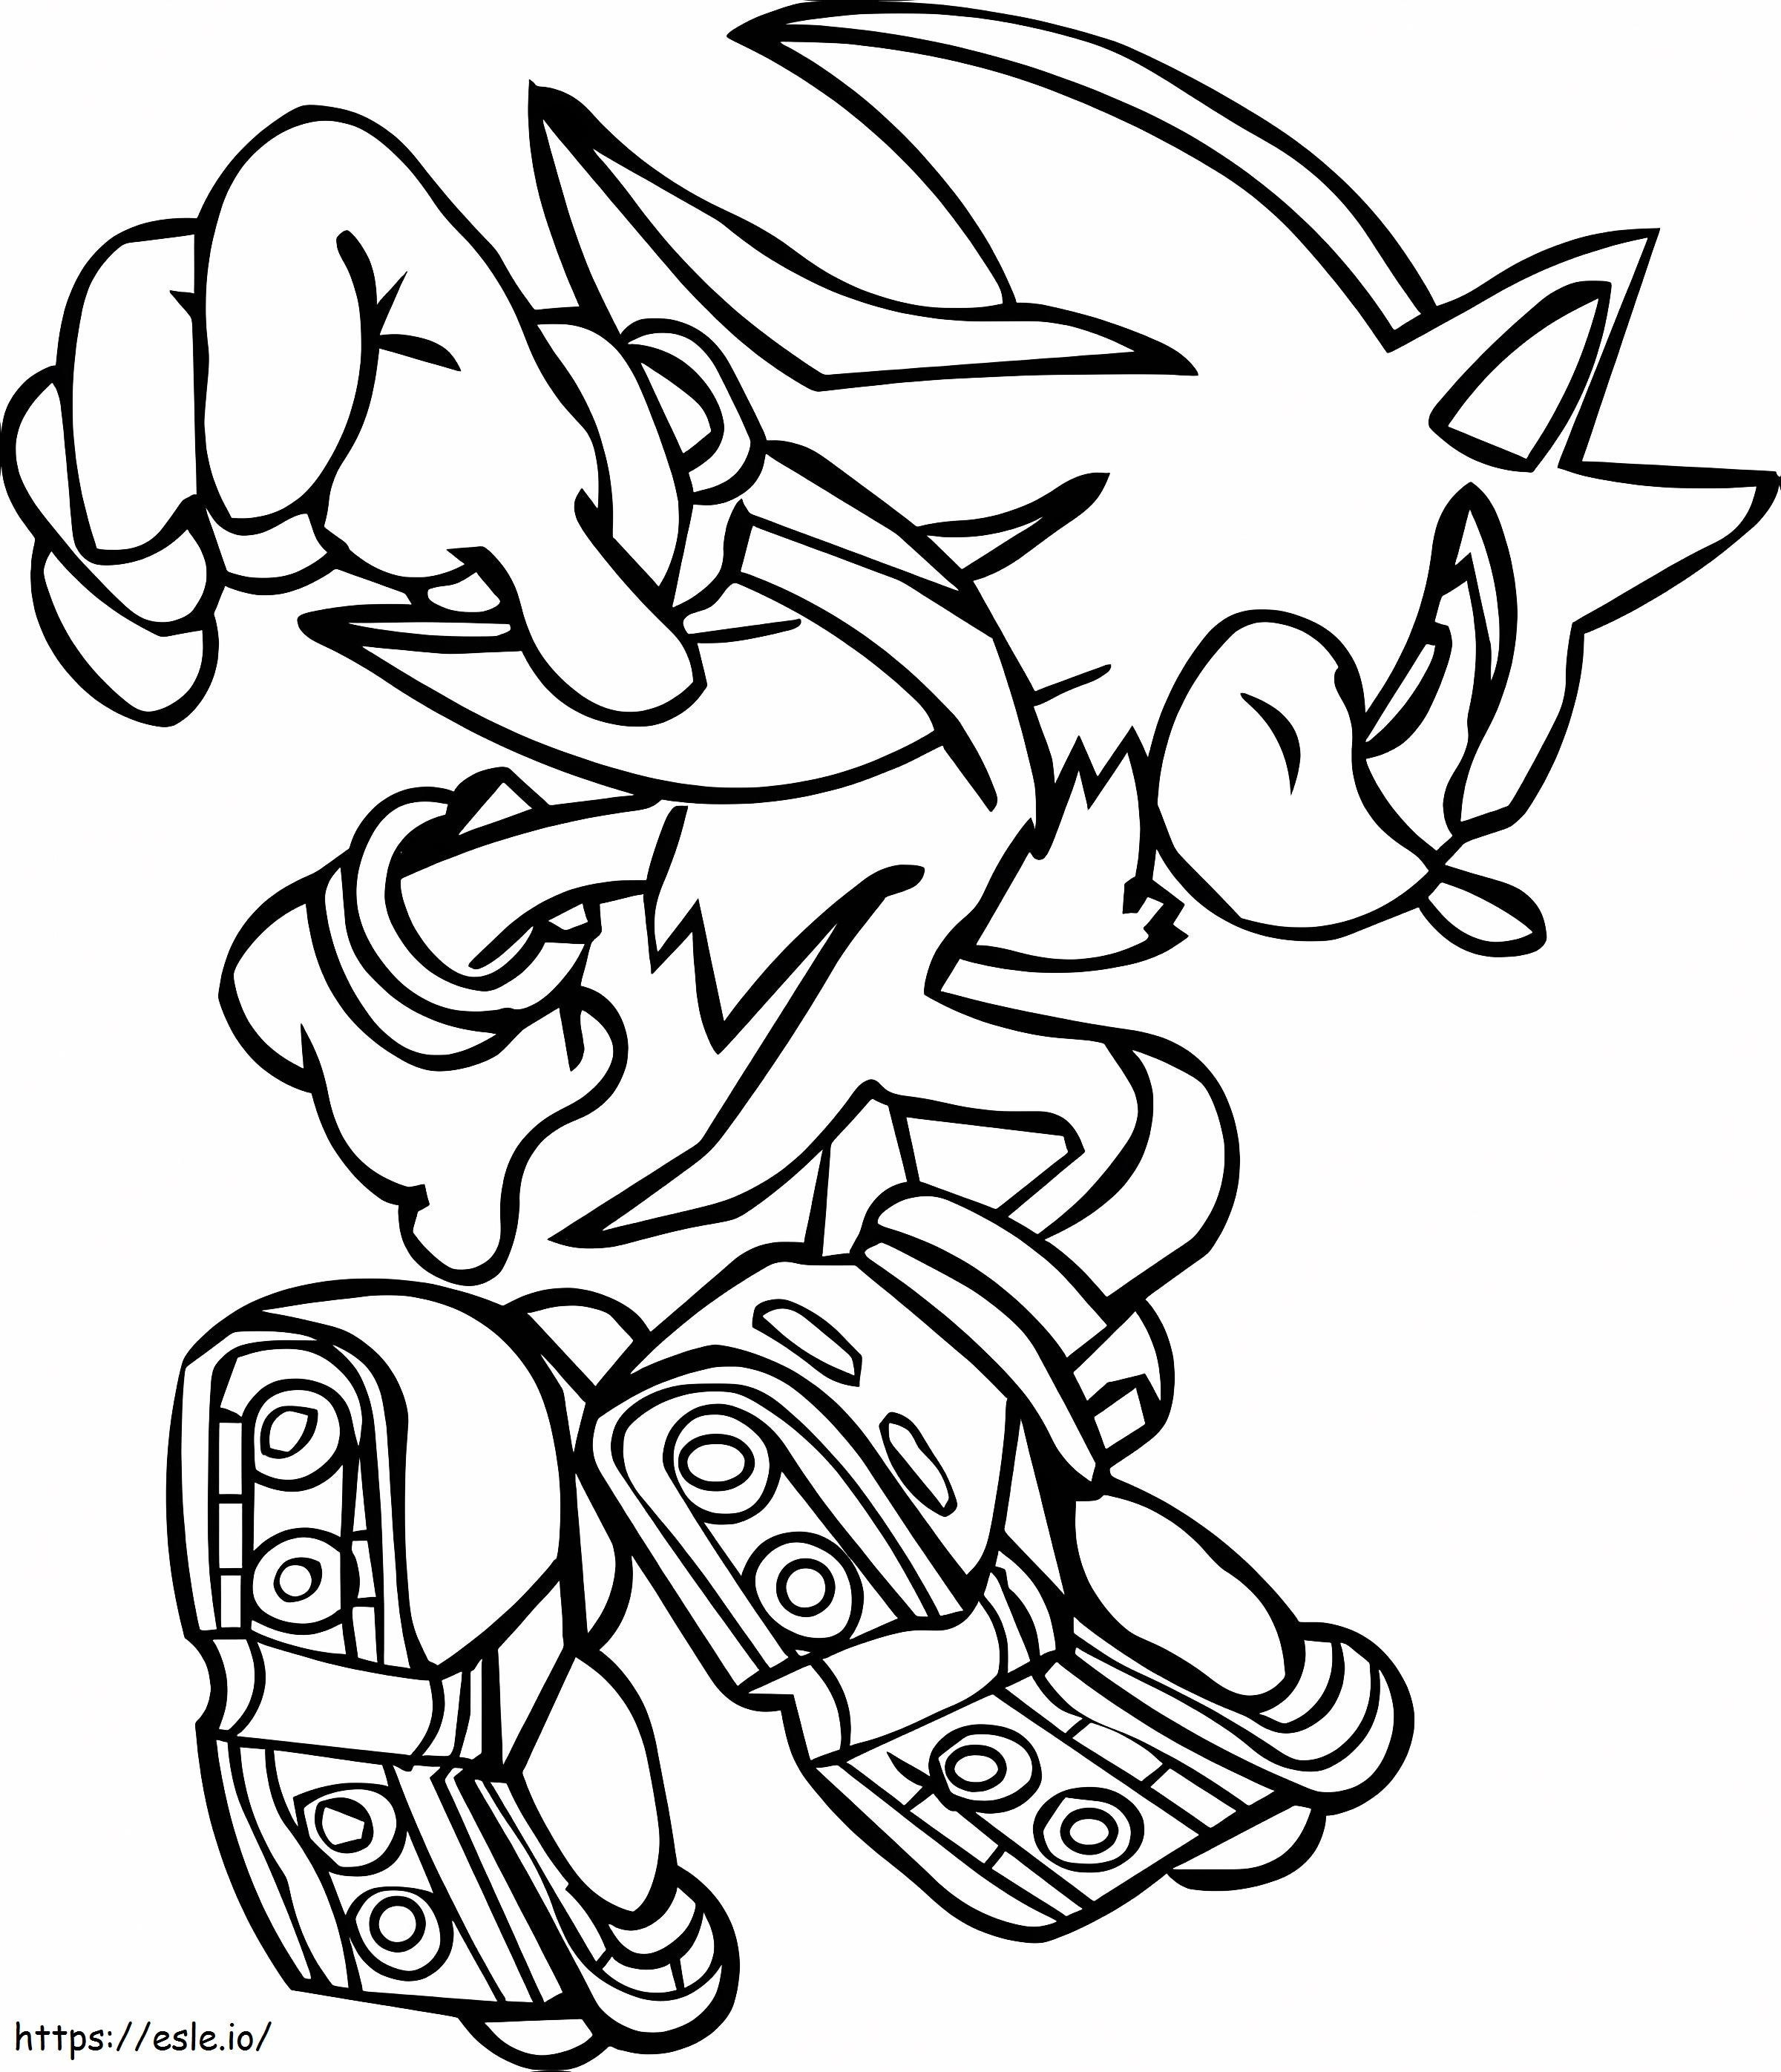 Shadow The Hedgehog Is Cool coloring page